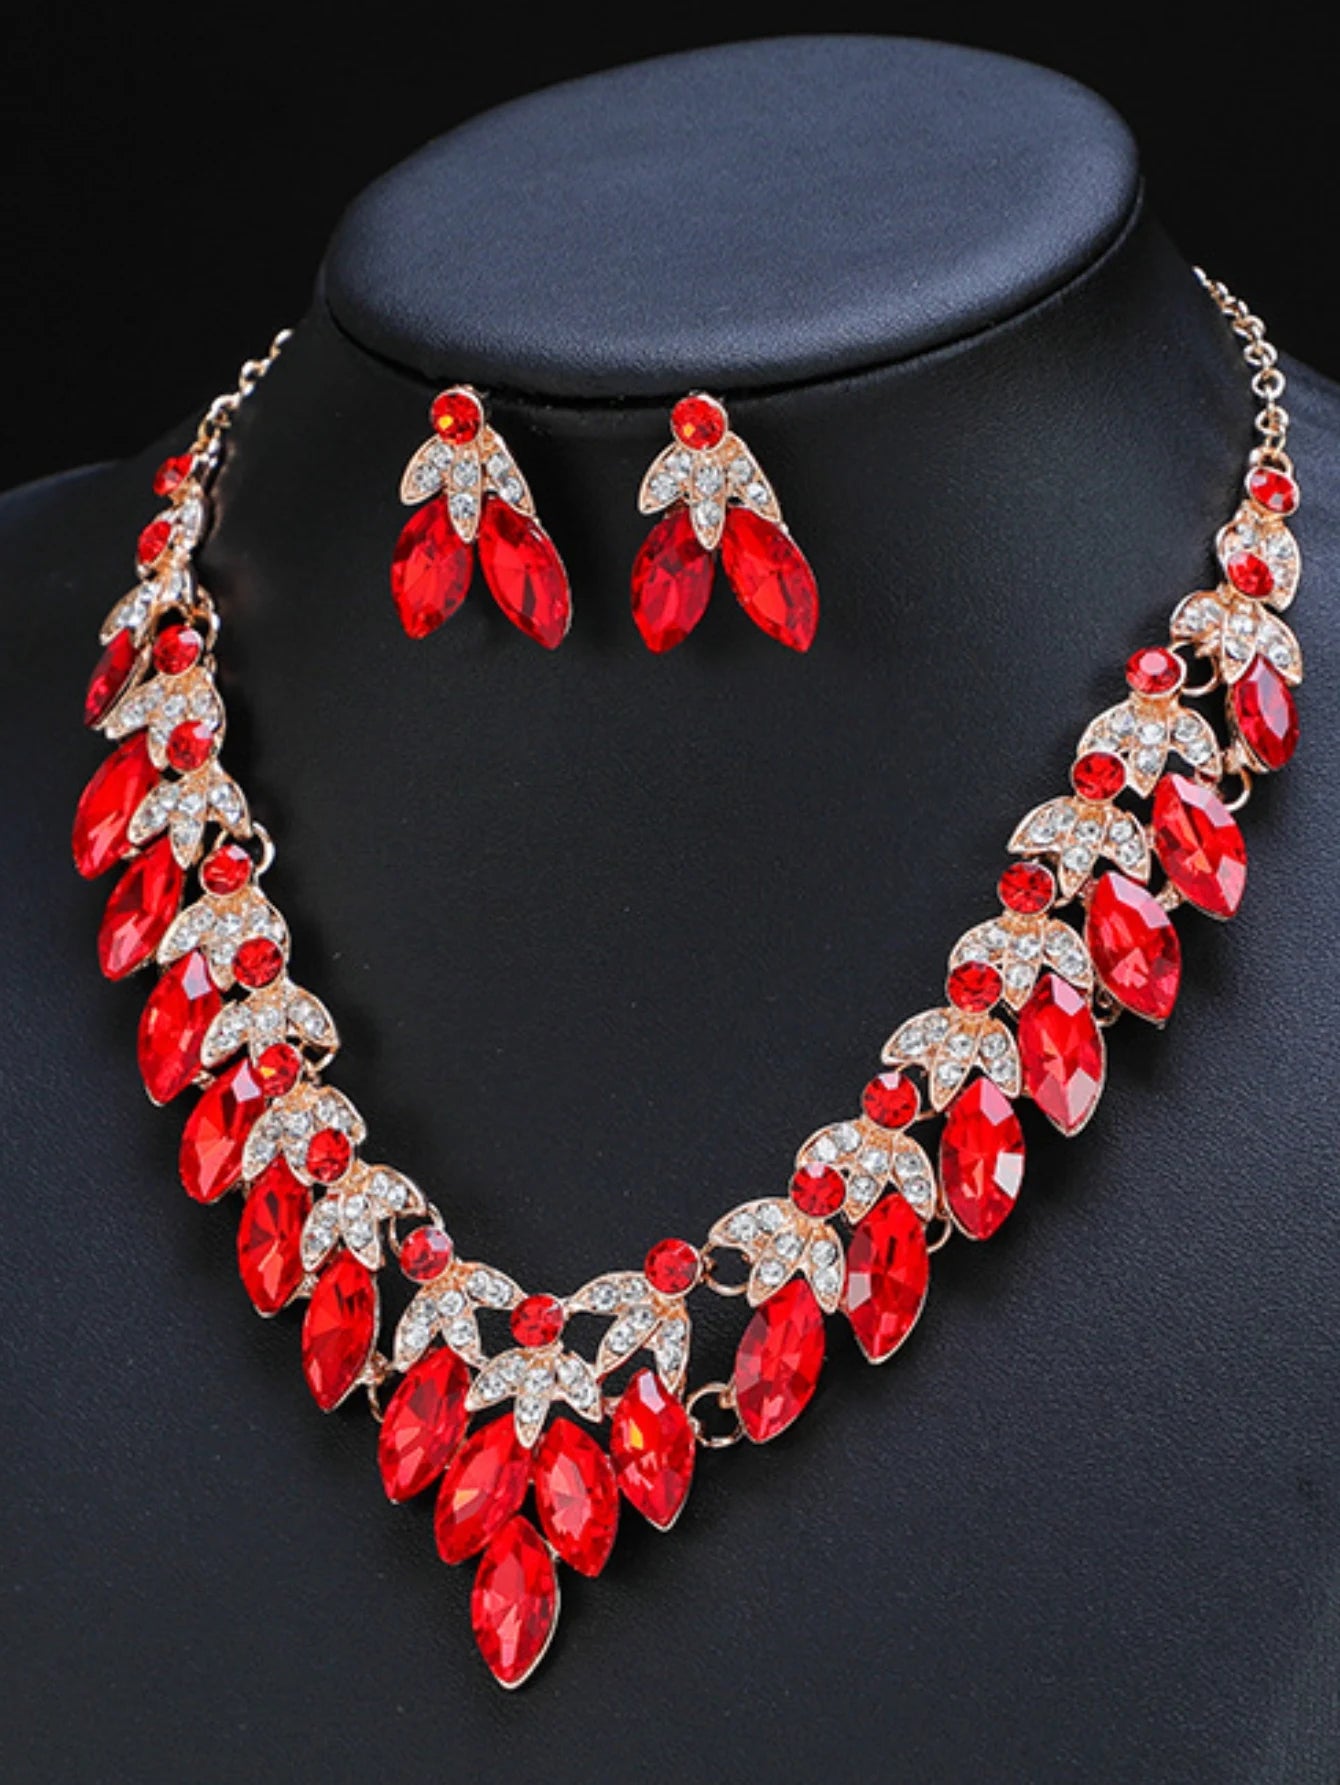 3 pcs jewelry set with crystal women's necklace and earrings for decoration, suitable for women to attend parties - Hiron Store